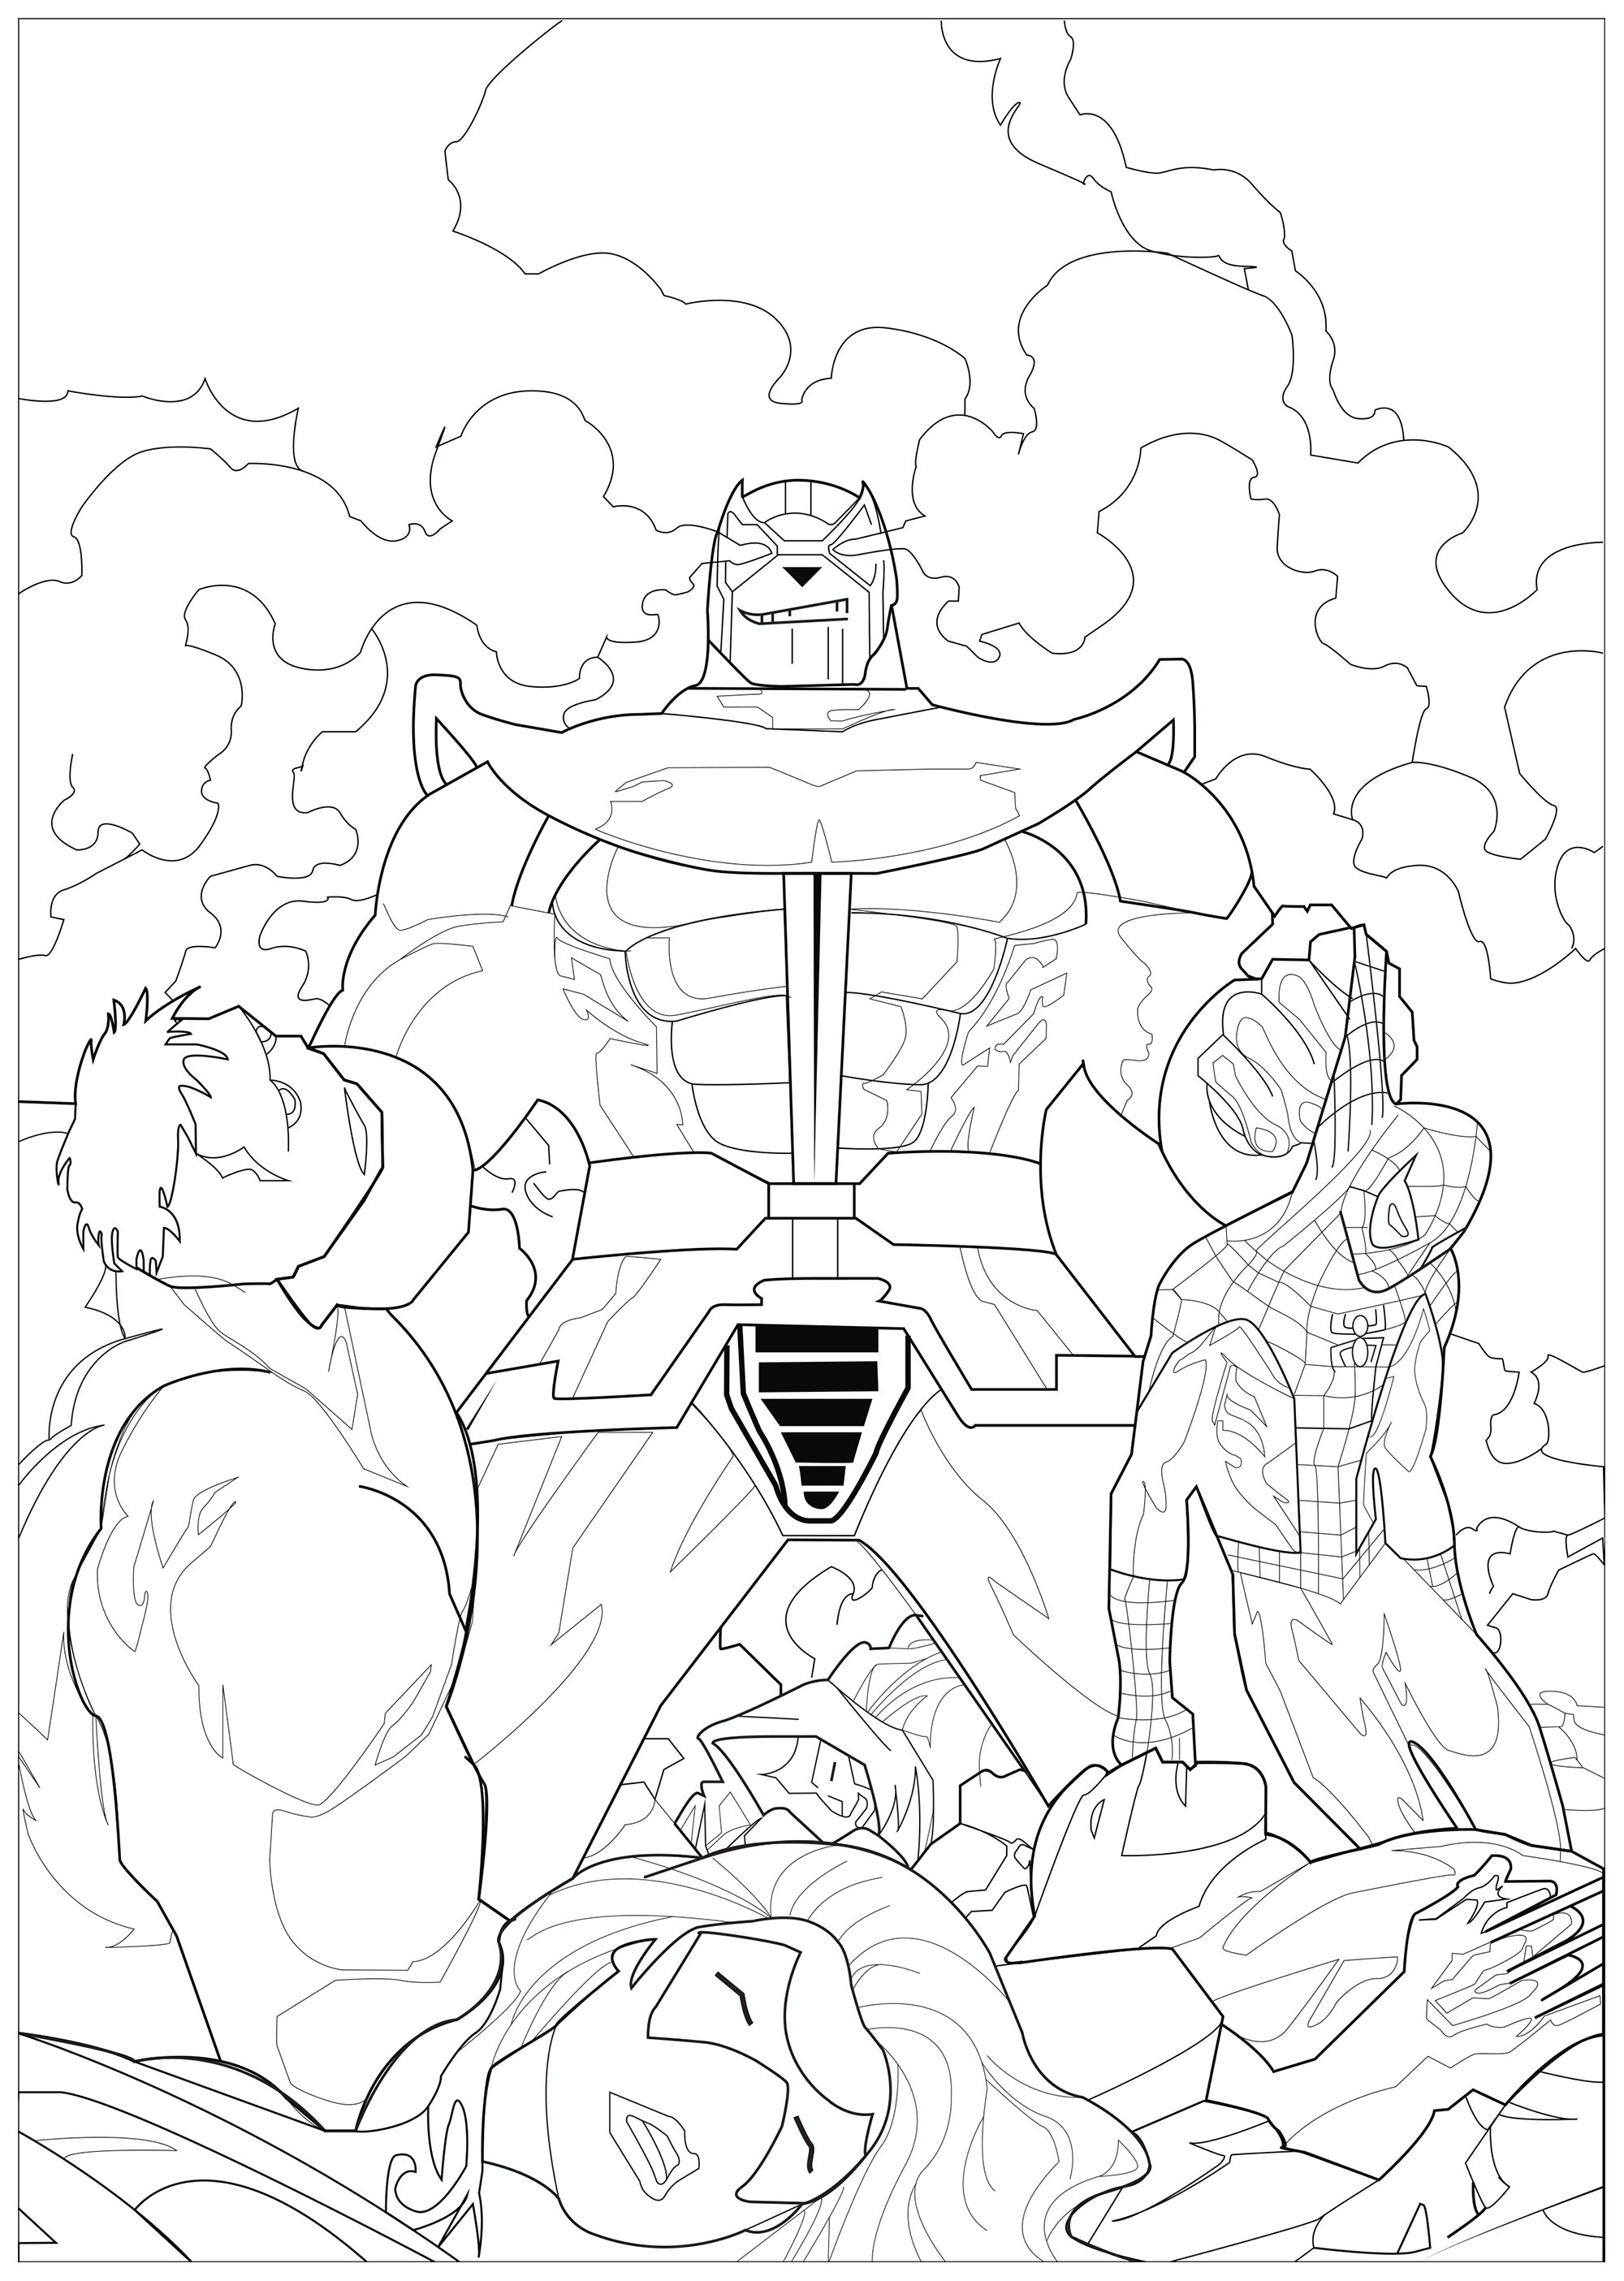 Thanos - Coloring Pages for Adults